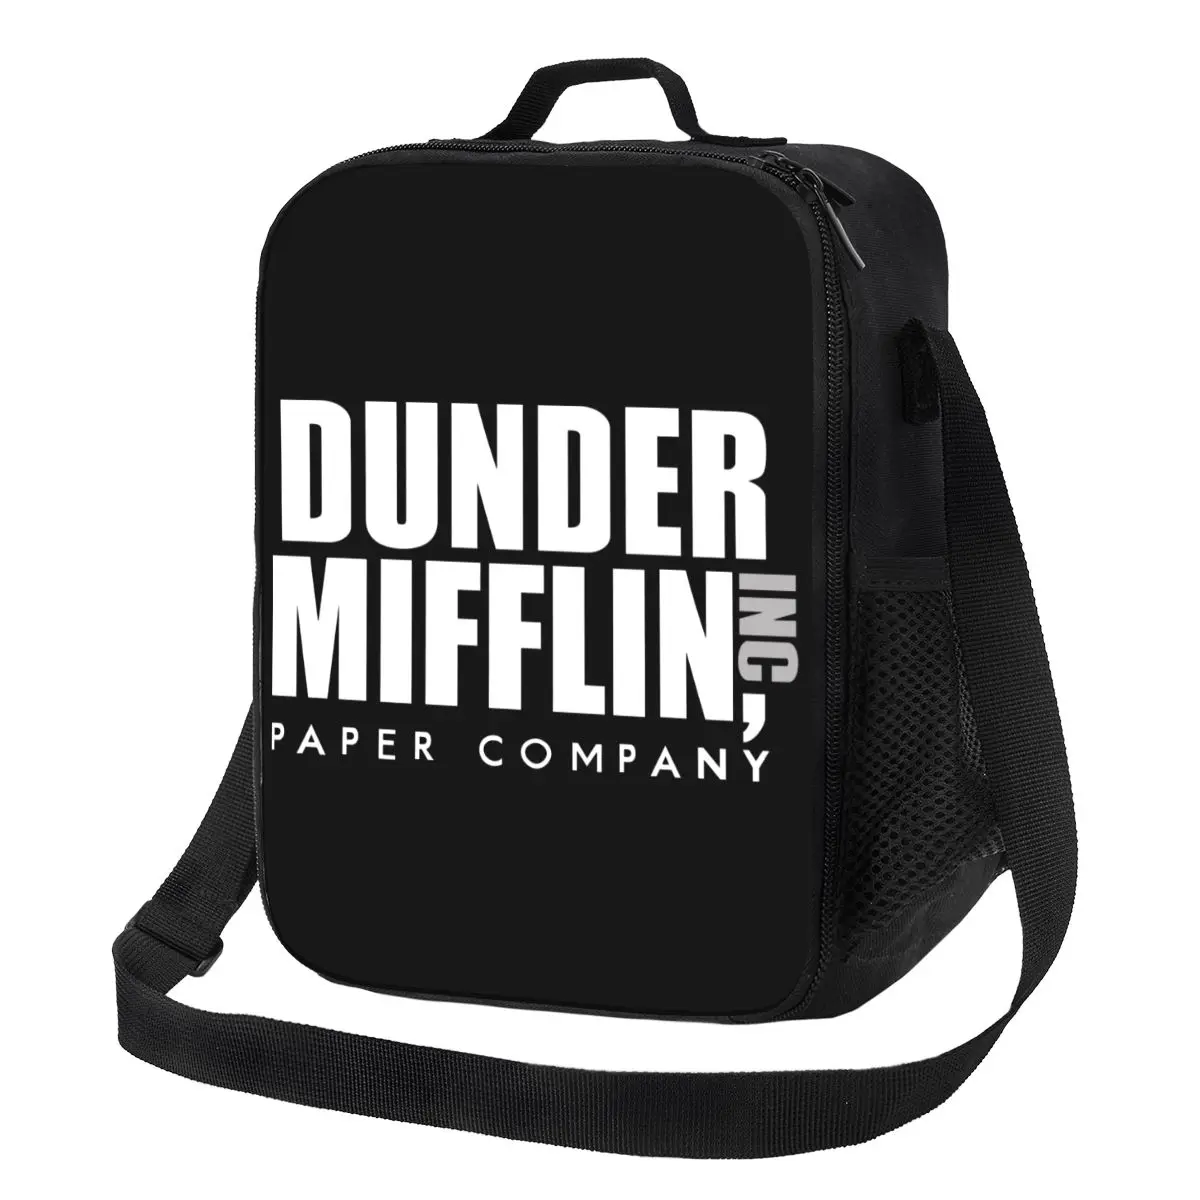 

The Office TV Show Dunder Mifflin Paper Company Insulated Lunch Bag for Women Cooler Thermal Lunch Box Office Picnic Travel